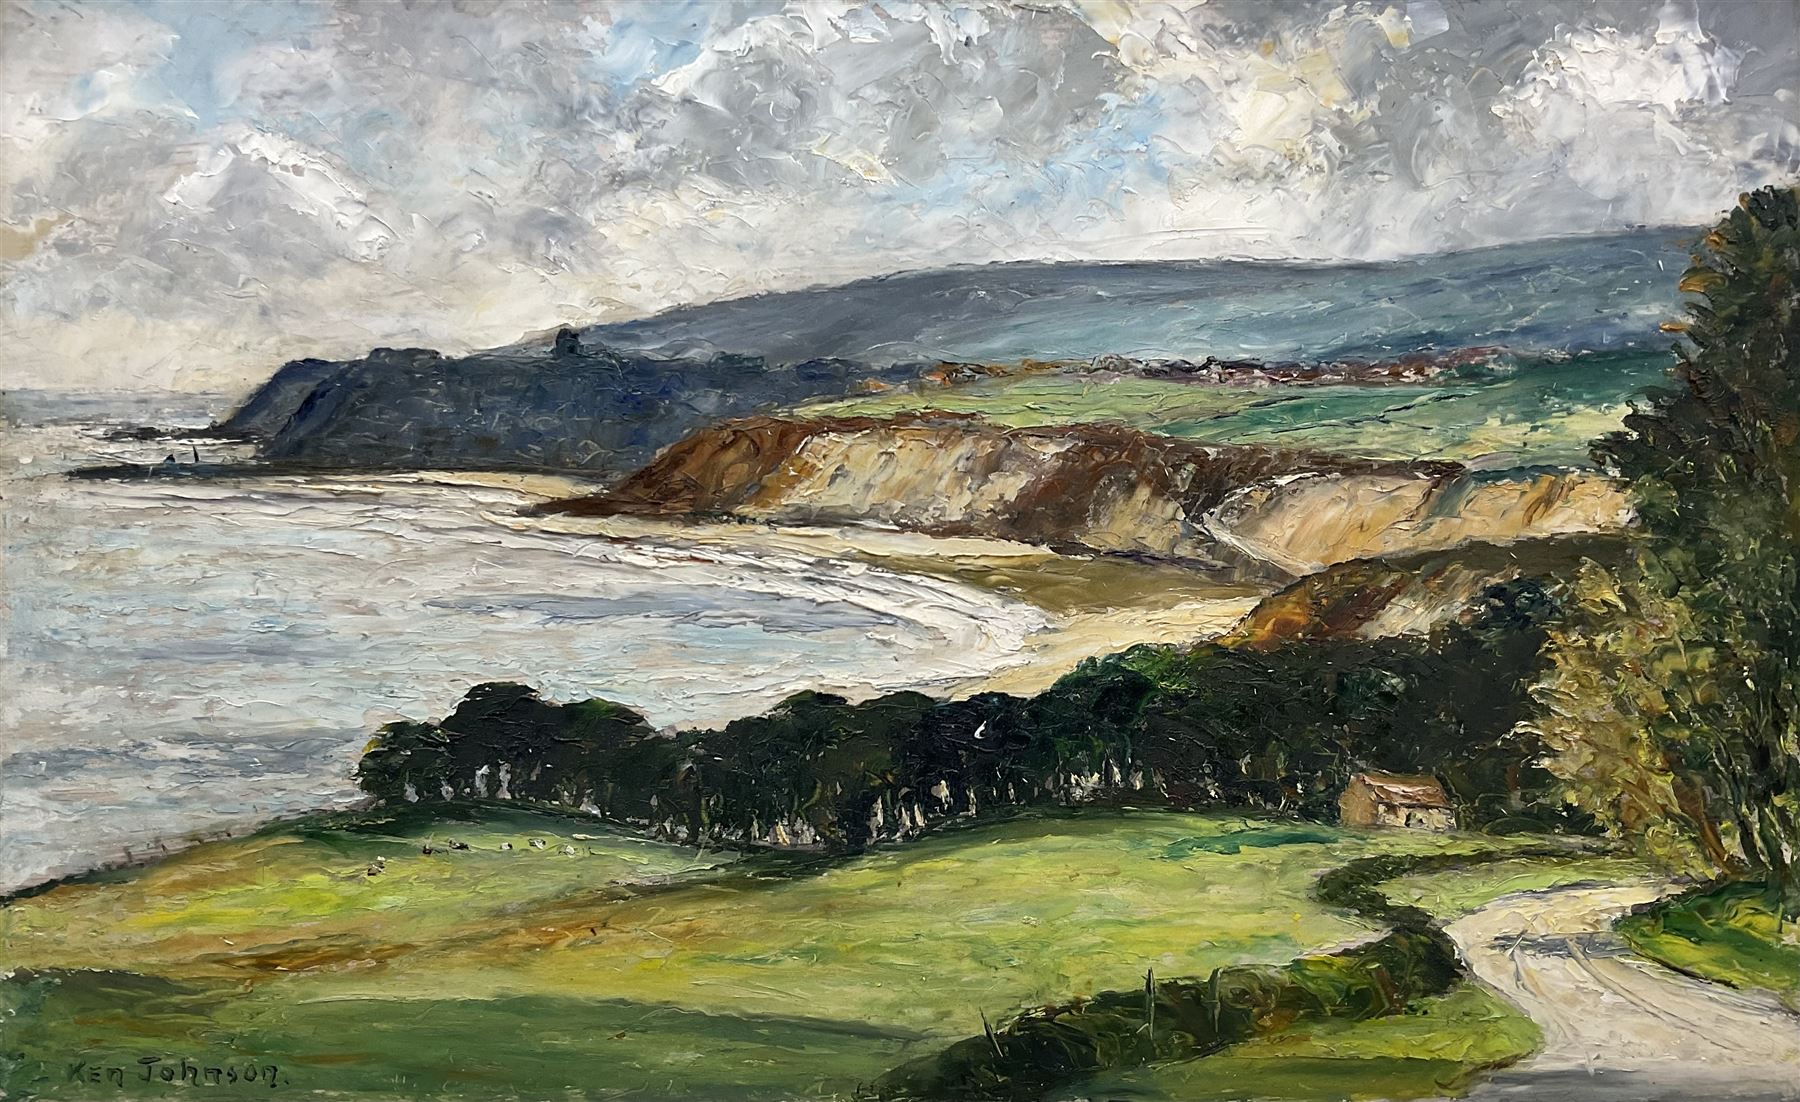 Ken Johnson (British 20th century): Whitby from Lythe Bank